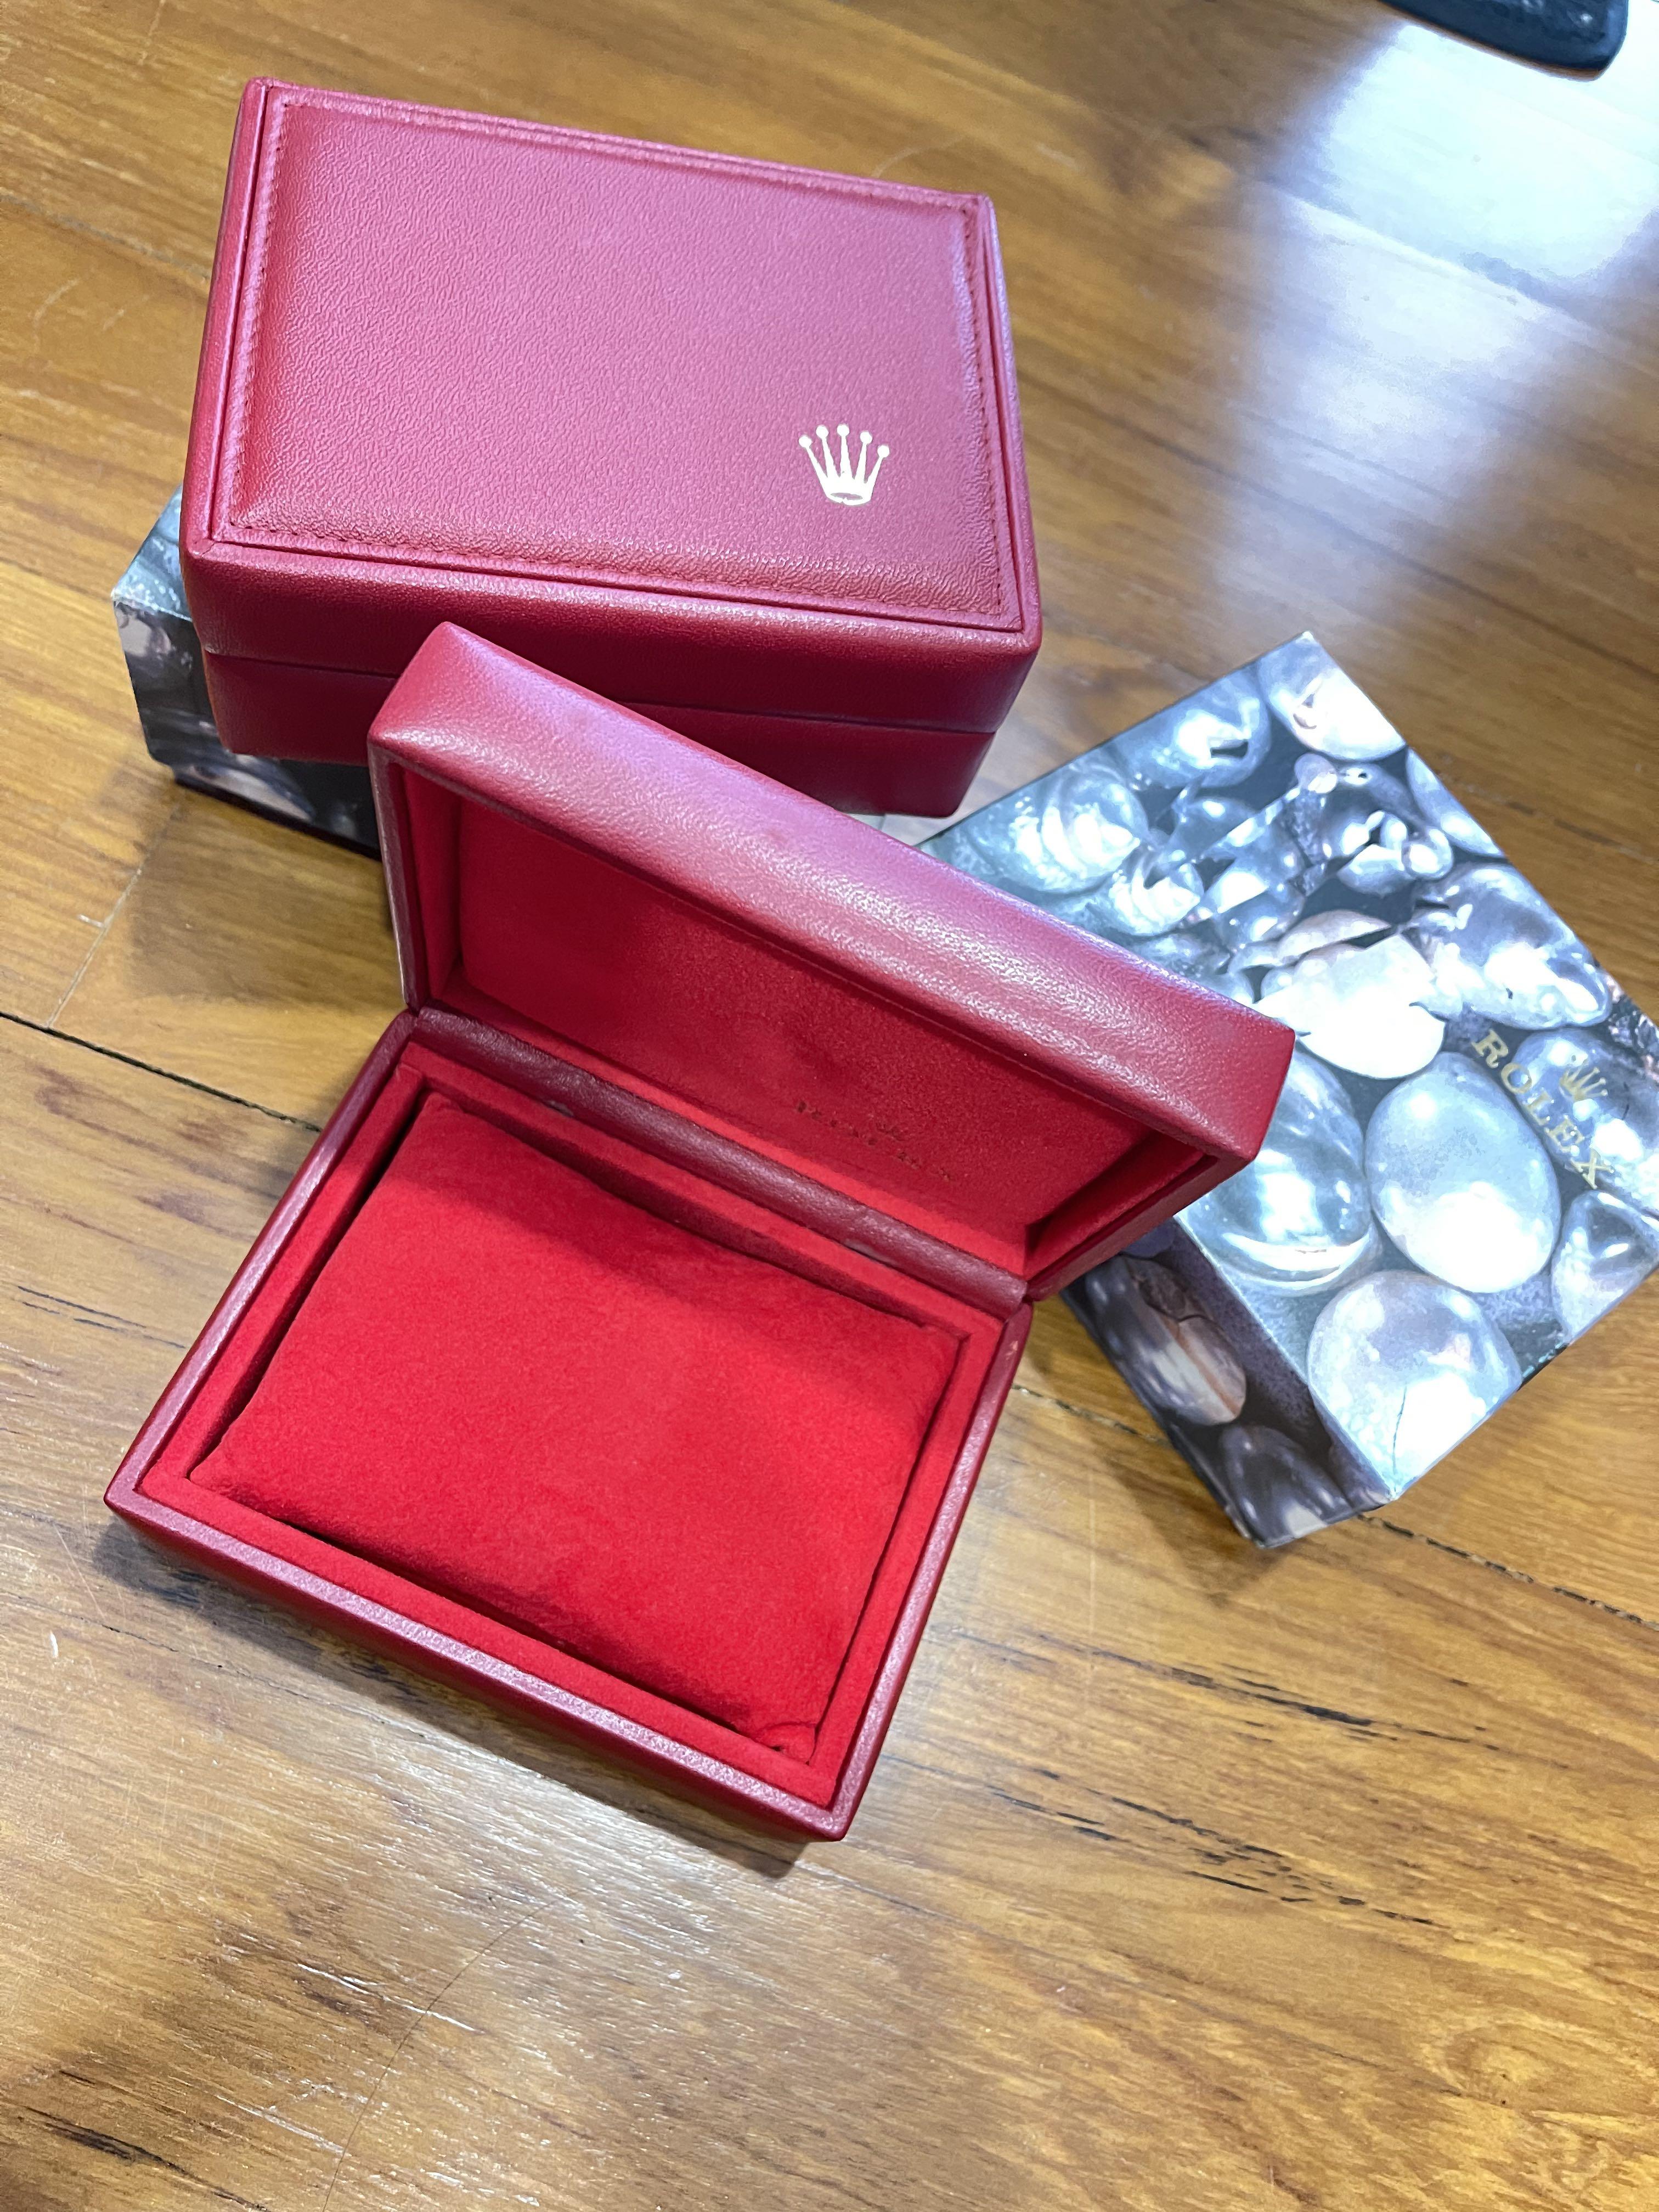 Unused) vintage Rolex red Women's Fashion, Jewelry & Organisers, Precious Stones on Carousell